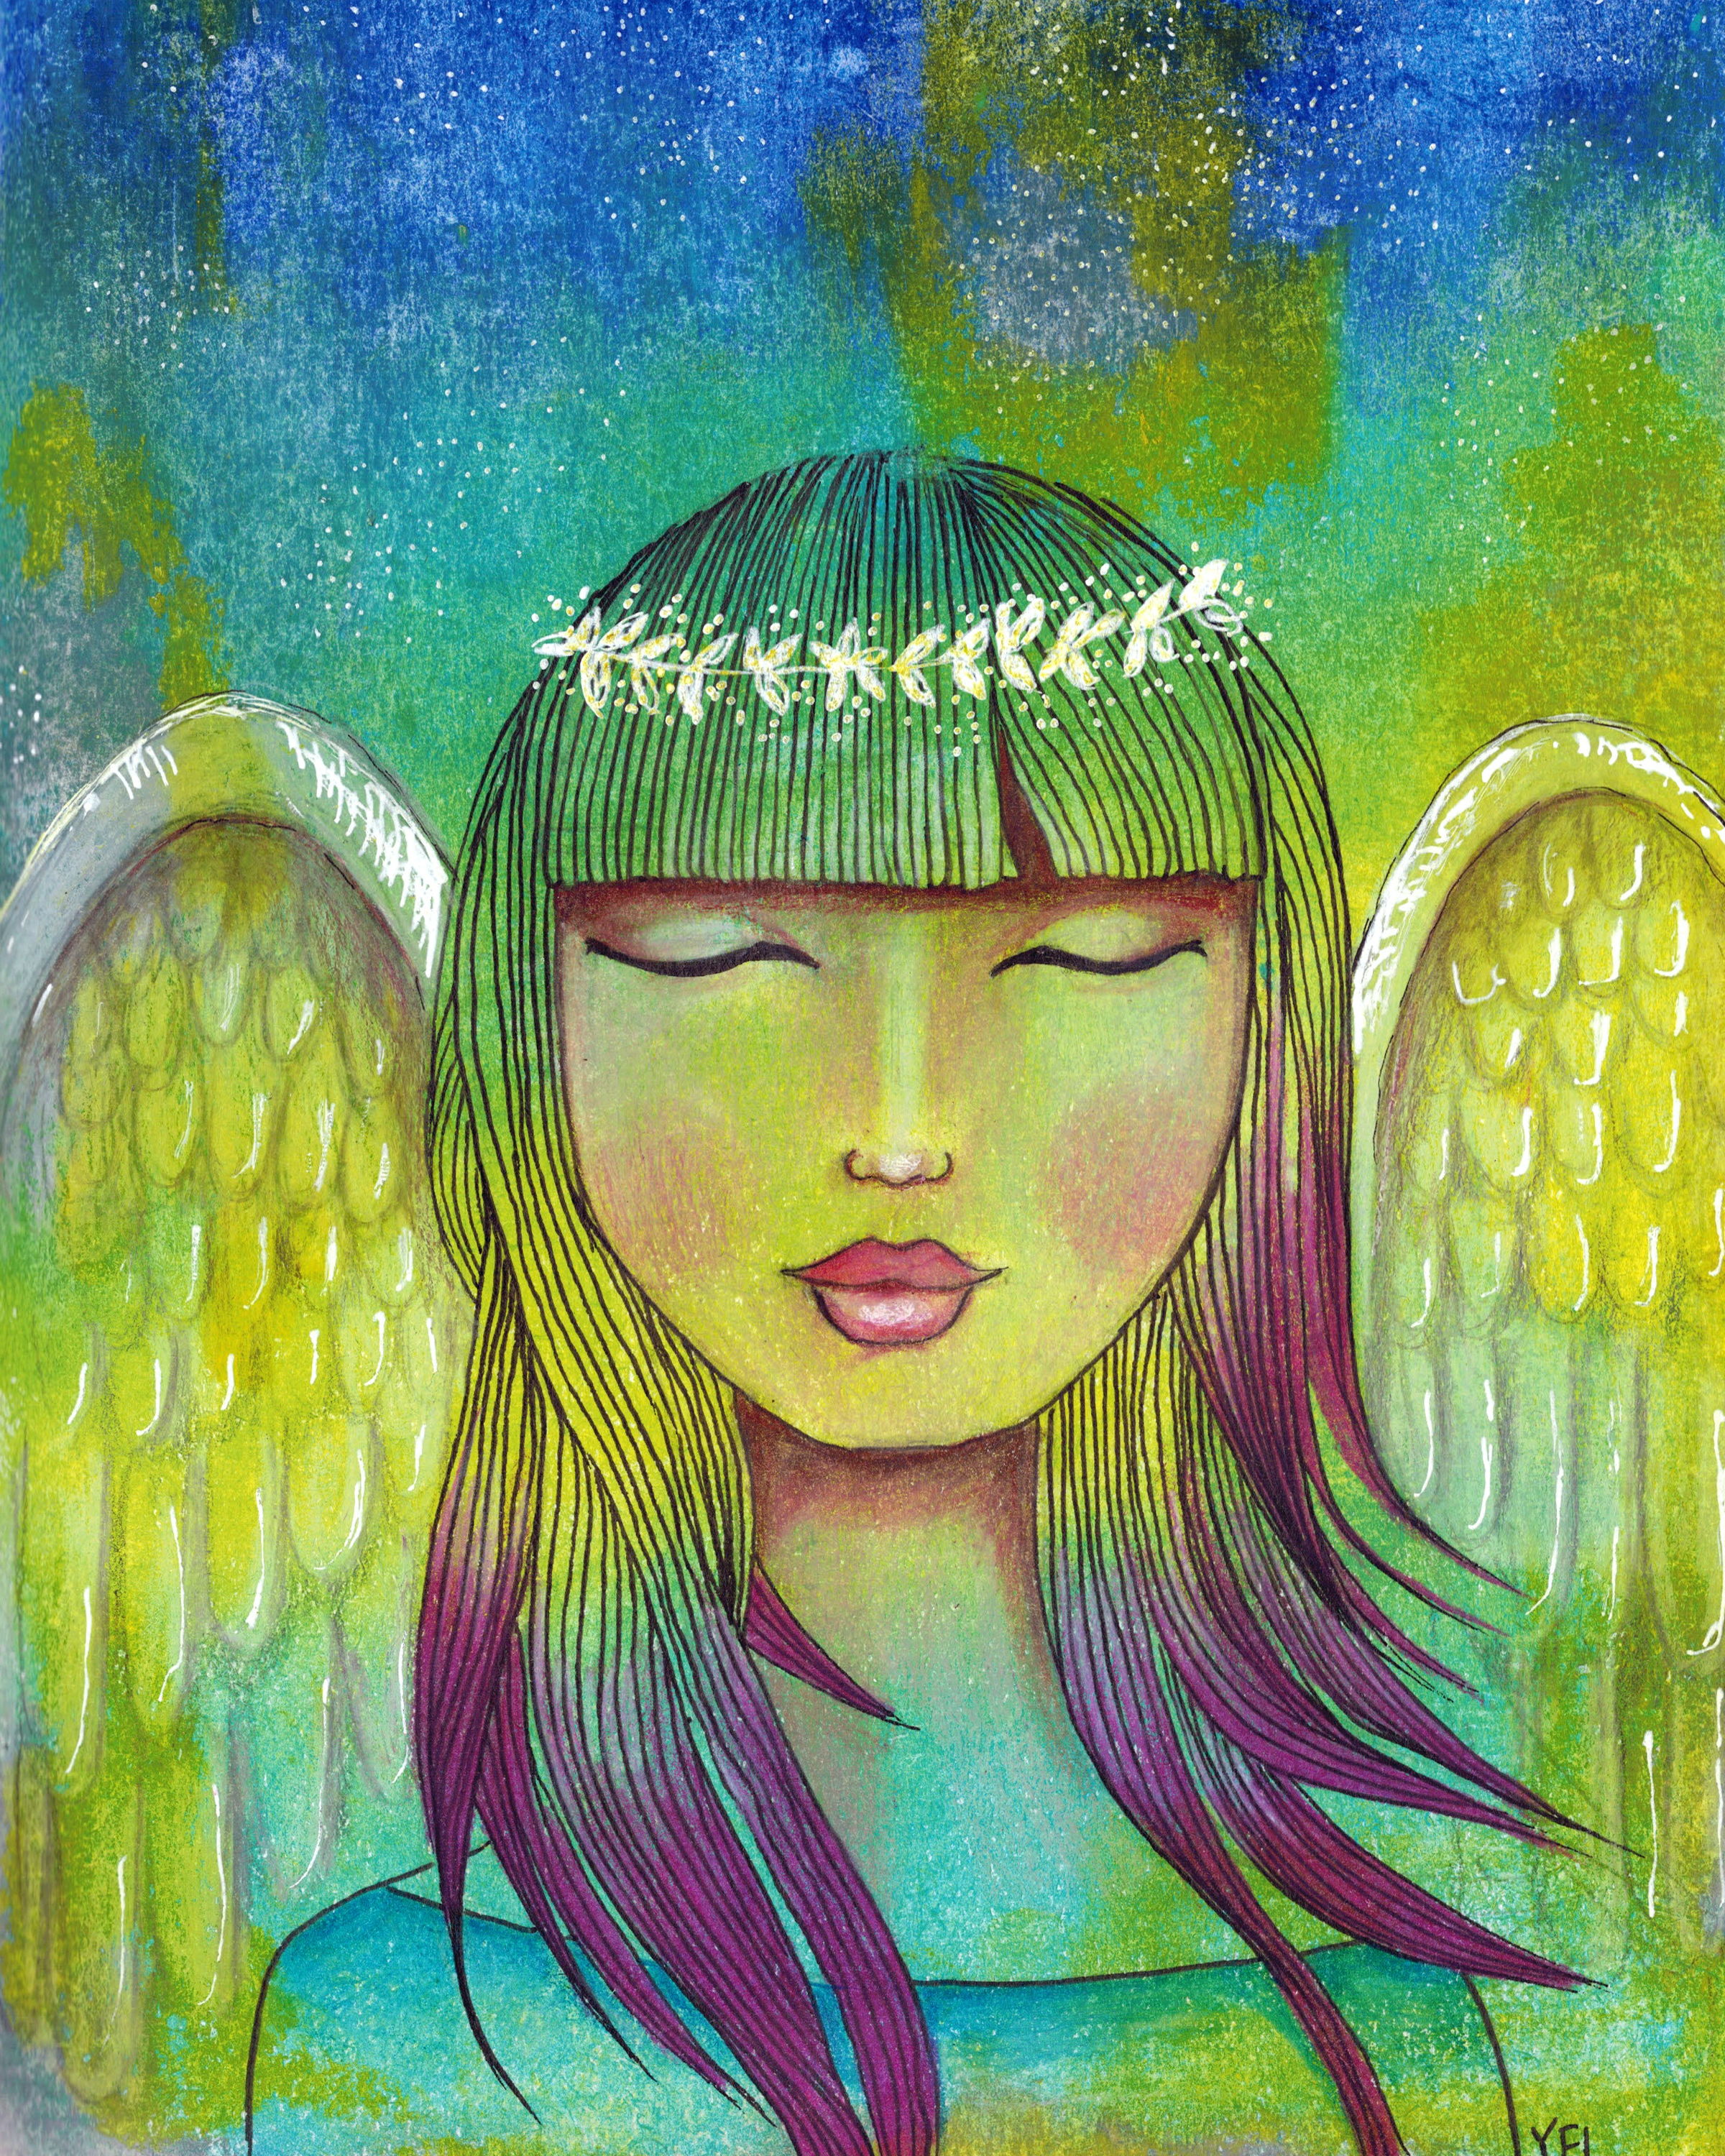 Guardian Angel without words 8x10.jpg